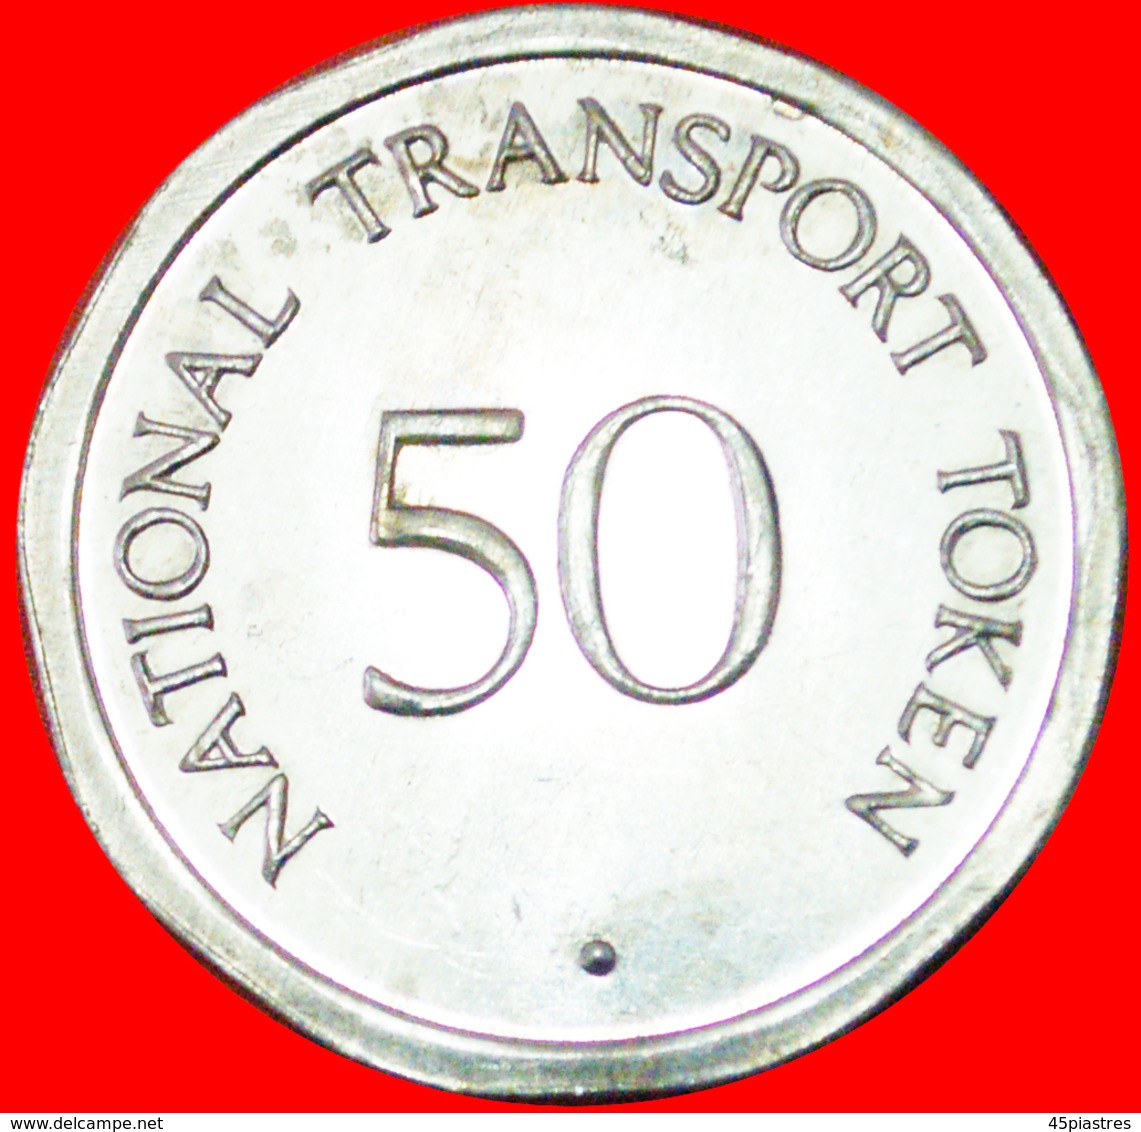 · YORK MINSTER: GREAT BRITAIN ★ 50 PENCE NATIONAL TRANSPORT TOKEN MINT LUSTER! LOW START ★ NO RESERVE! - Professionals/Firms